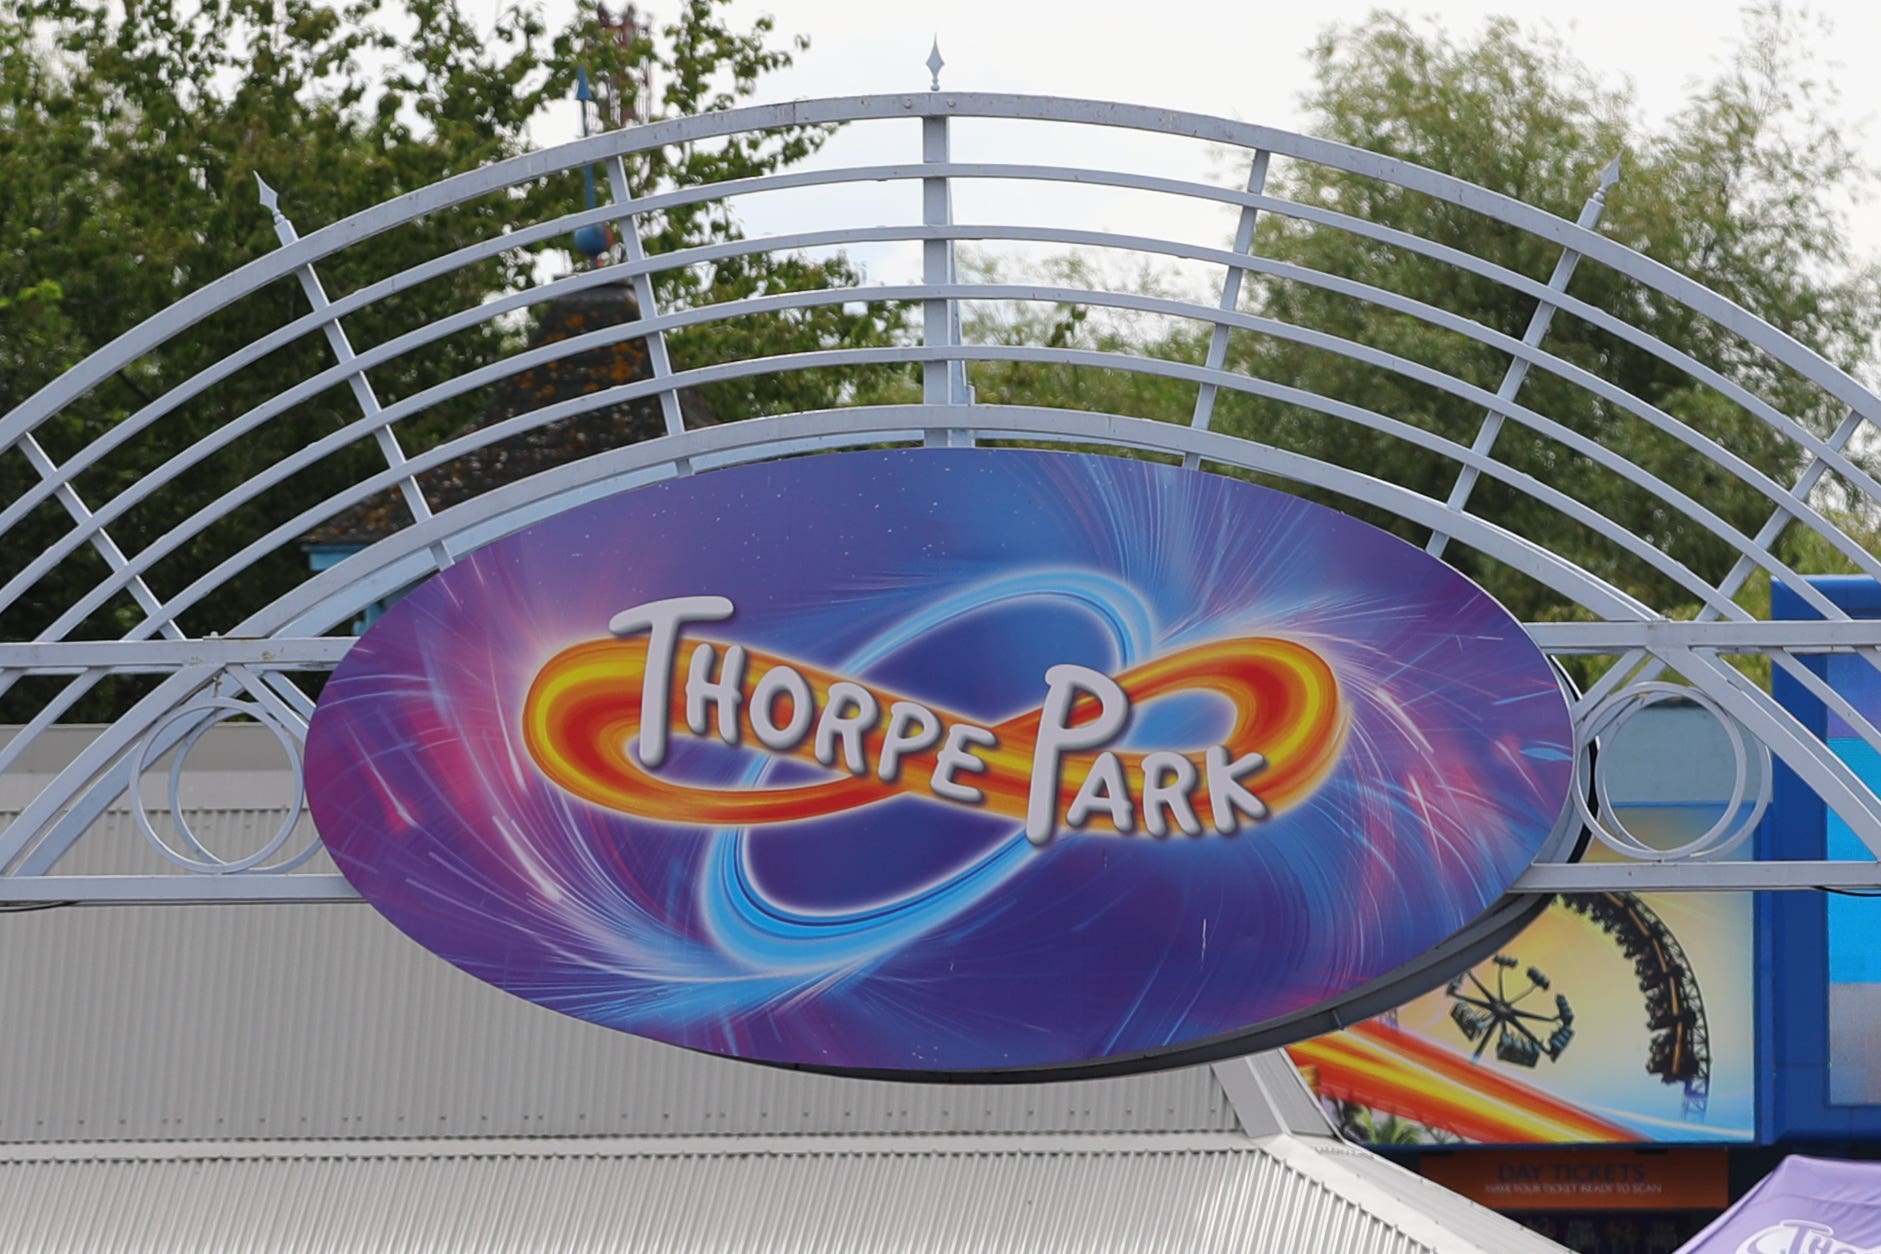 Three children missing after visiting Thorpe Park have been found safe in London (Aaron Chown/PA)